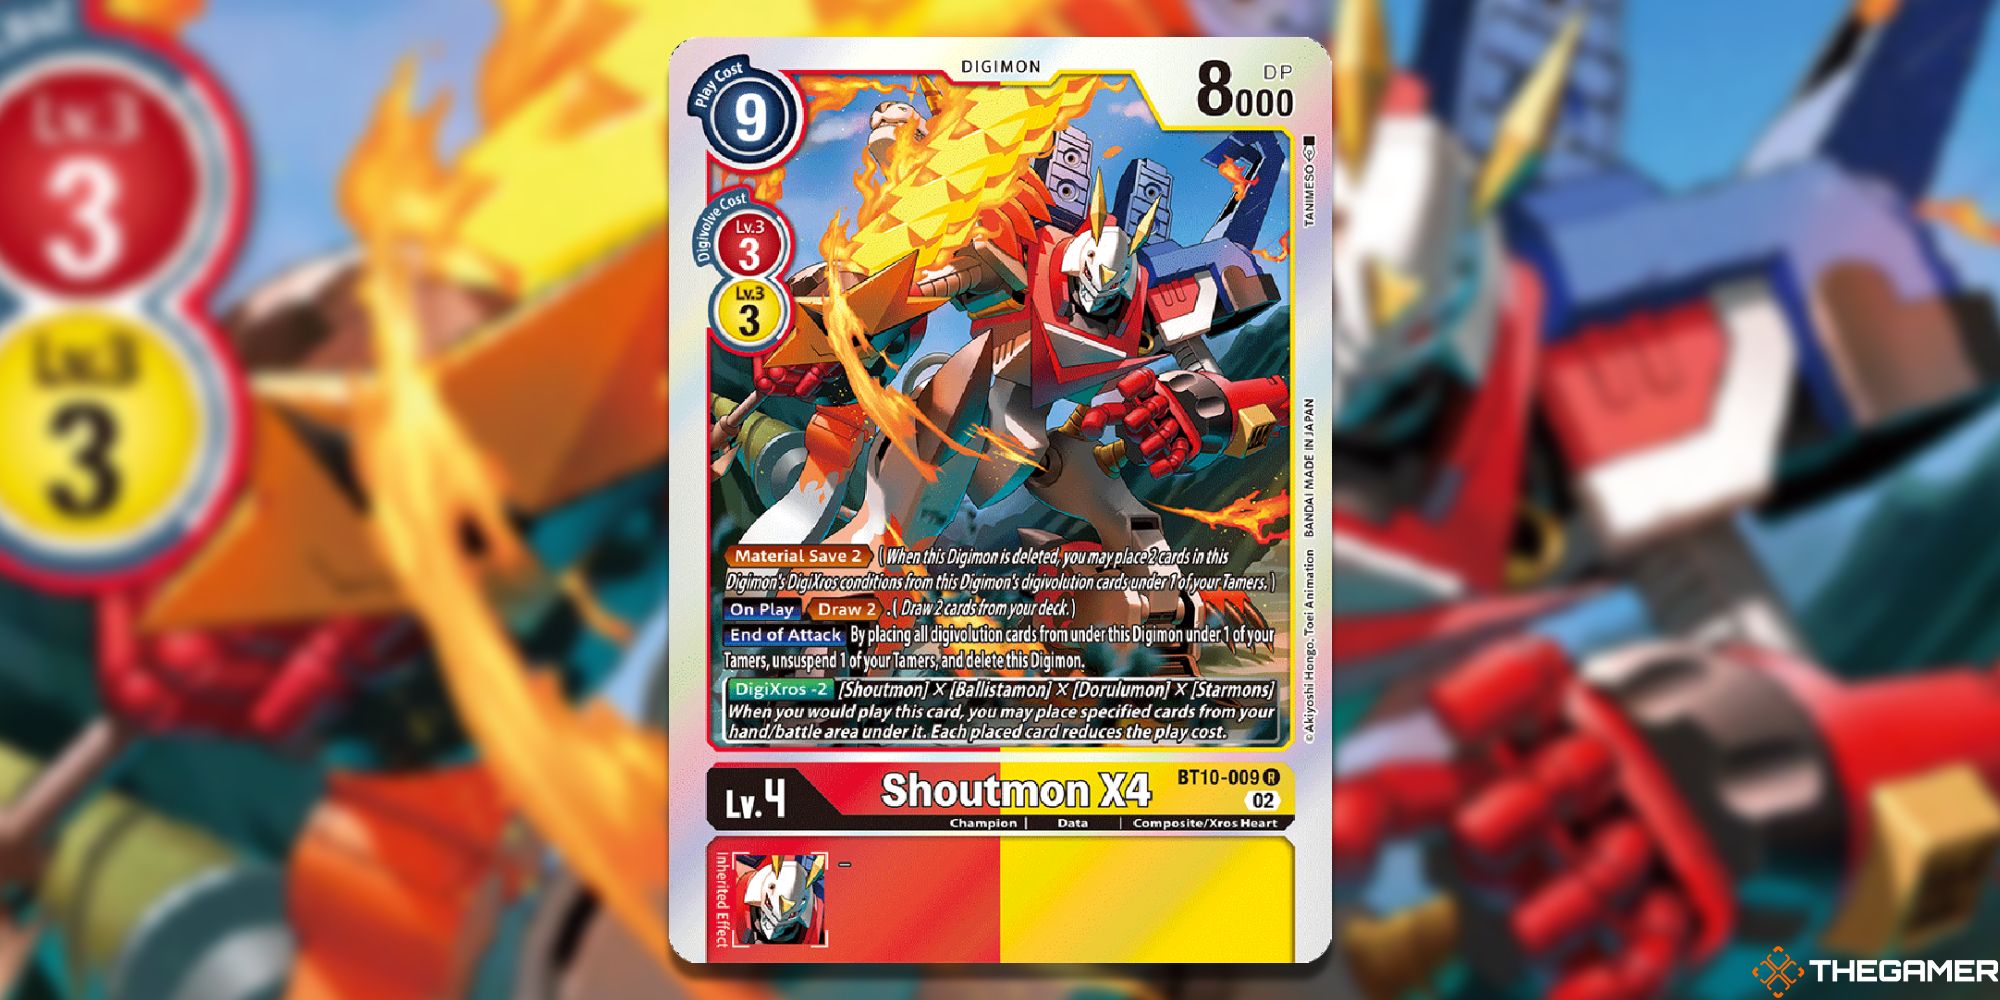 shoutmon X4 card from digimon card game with blur background